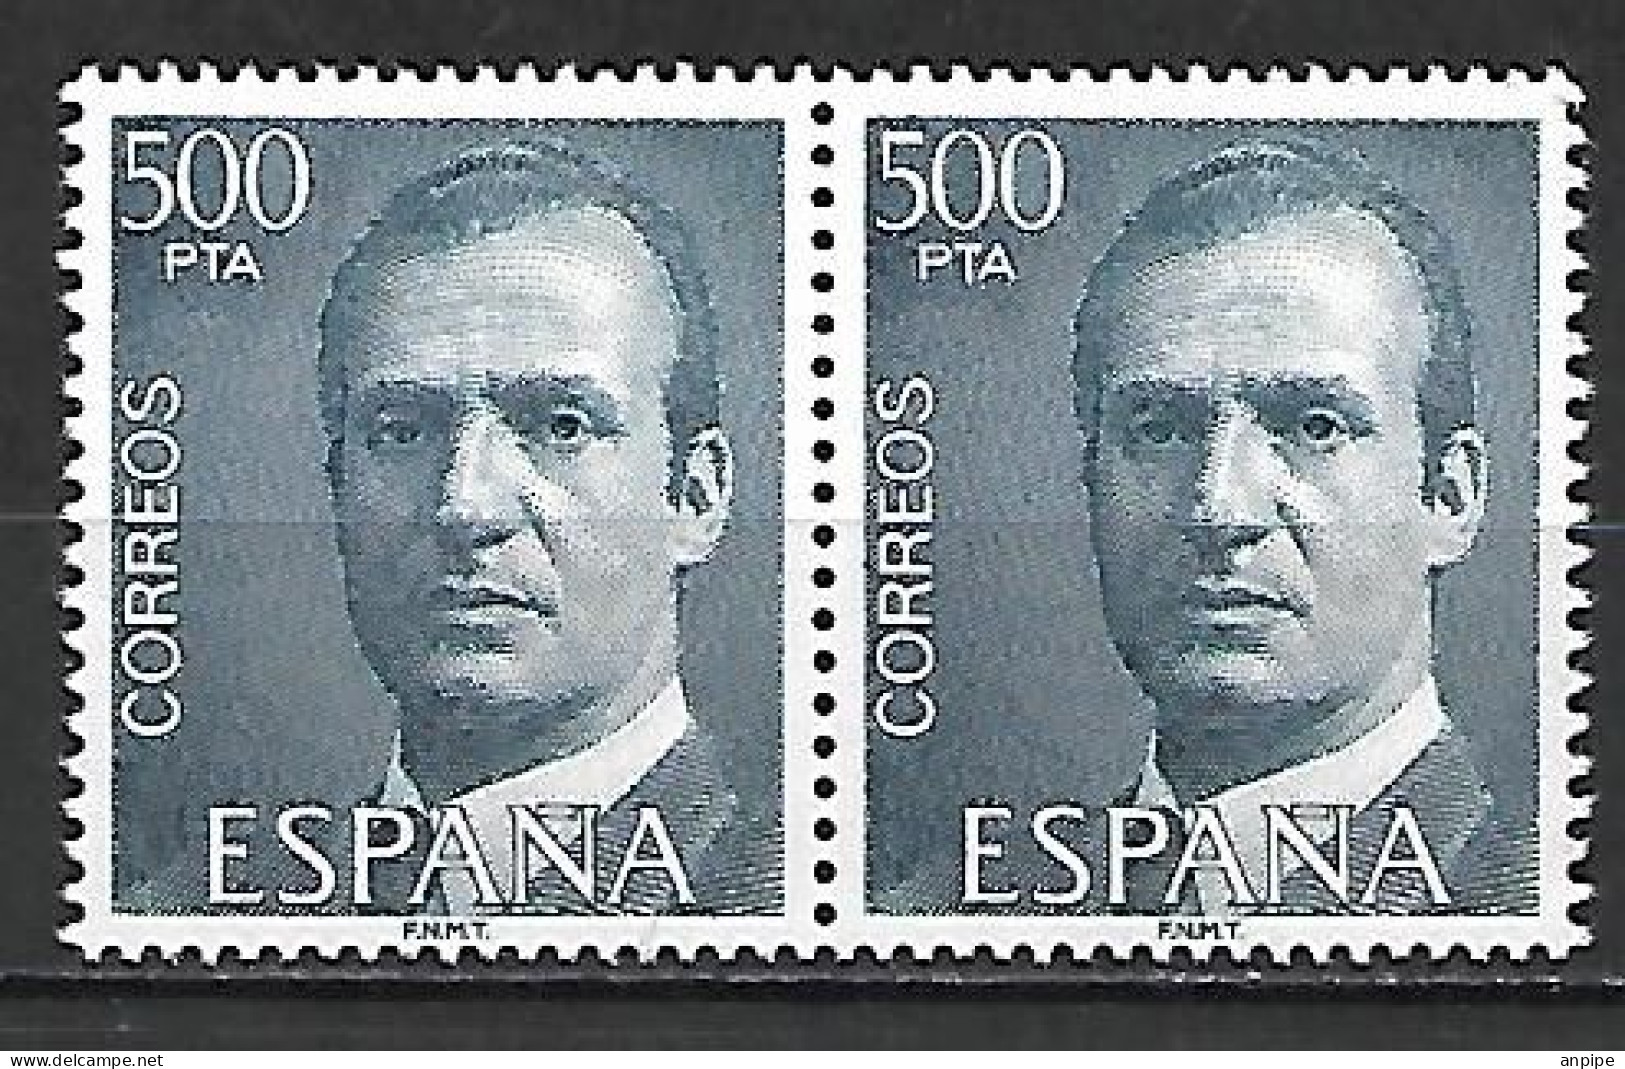 ESPAÑA, 1981 - Used Stamps